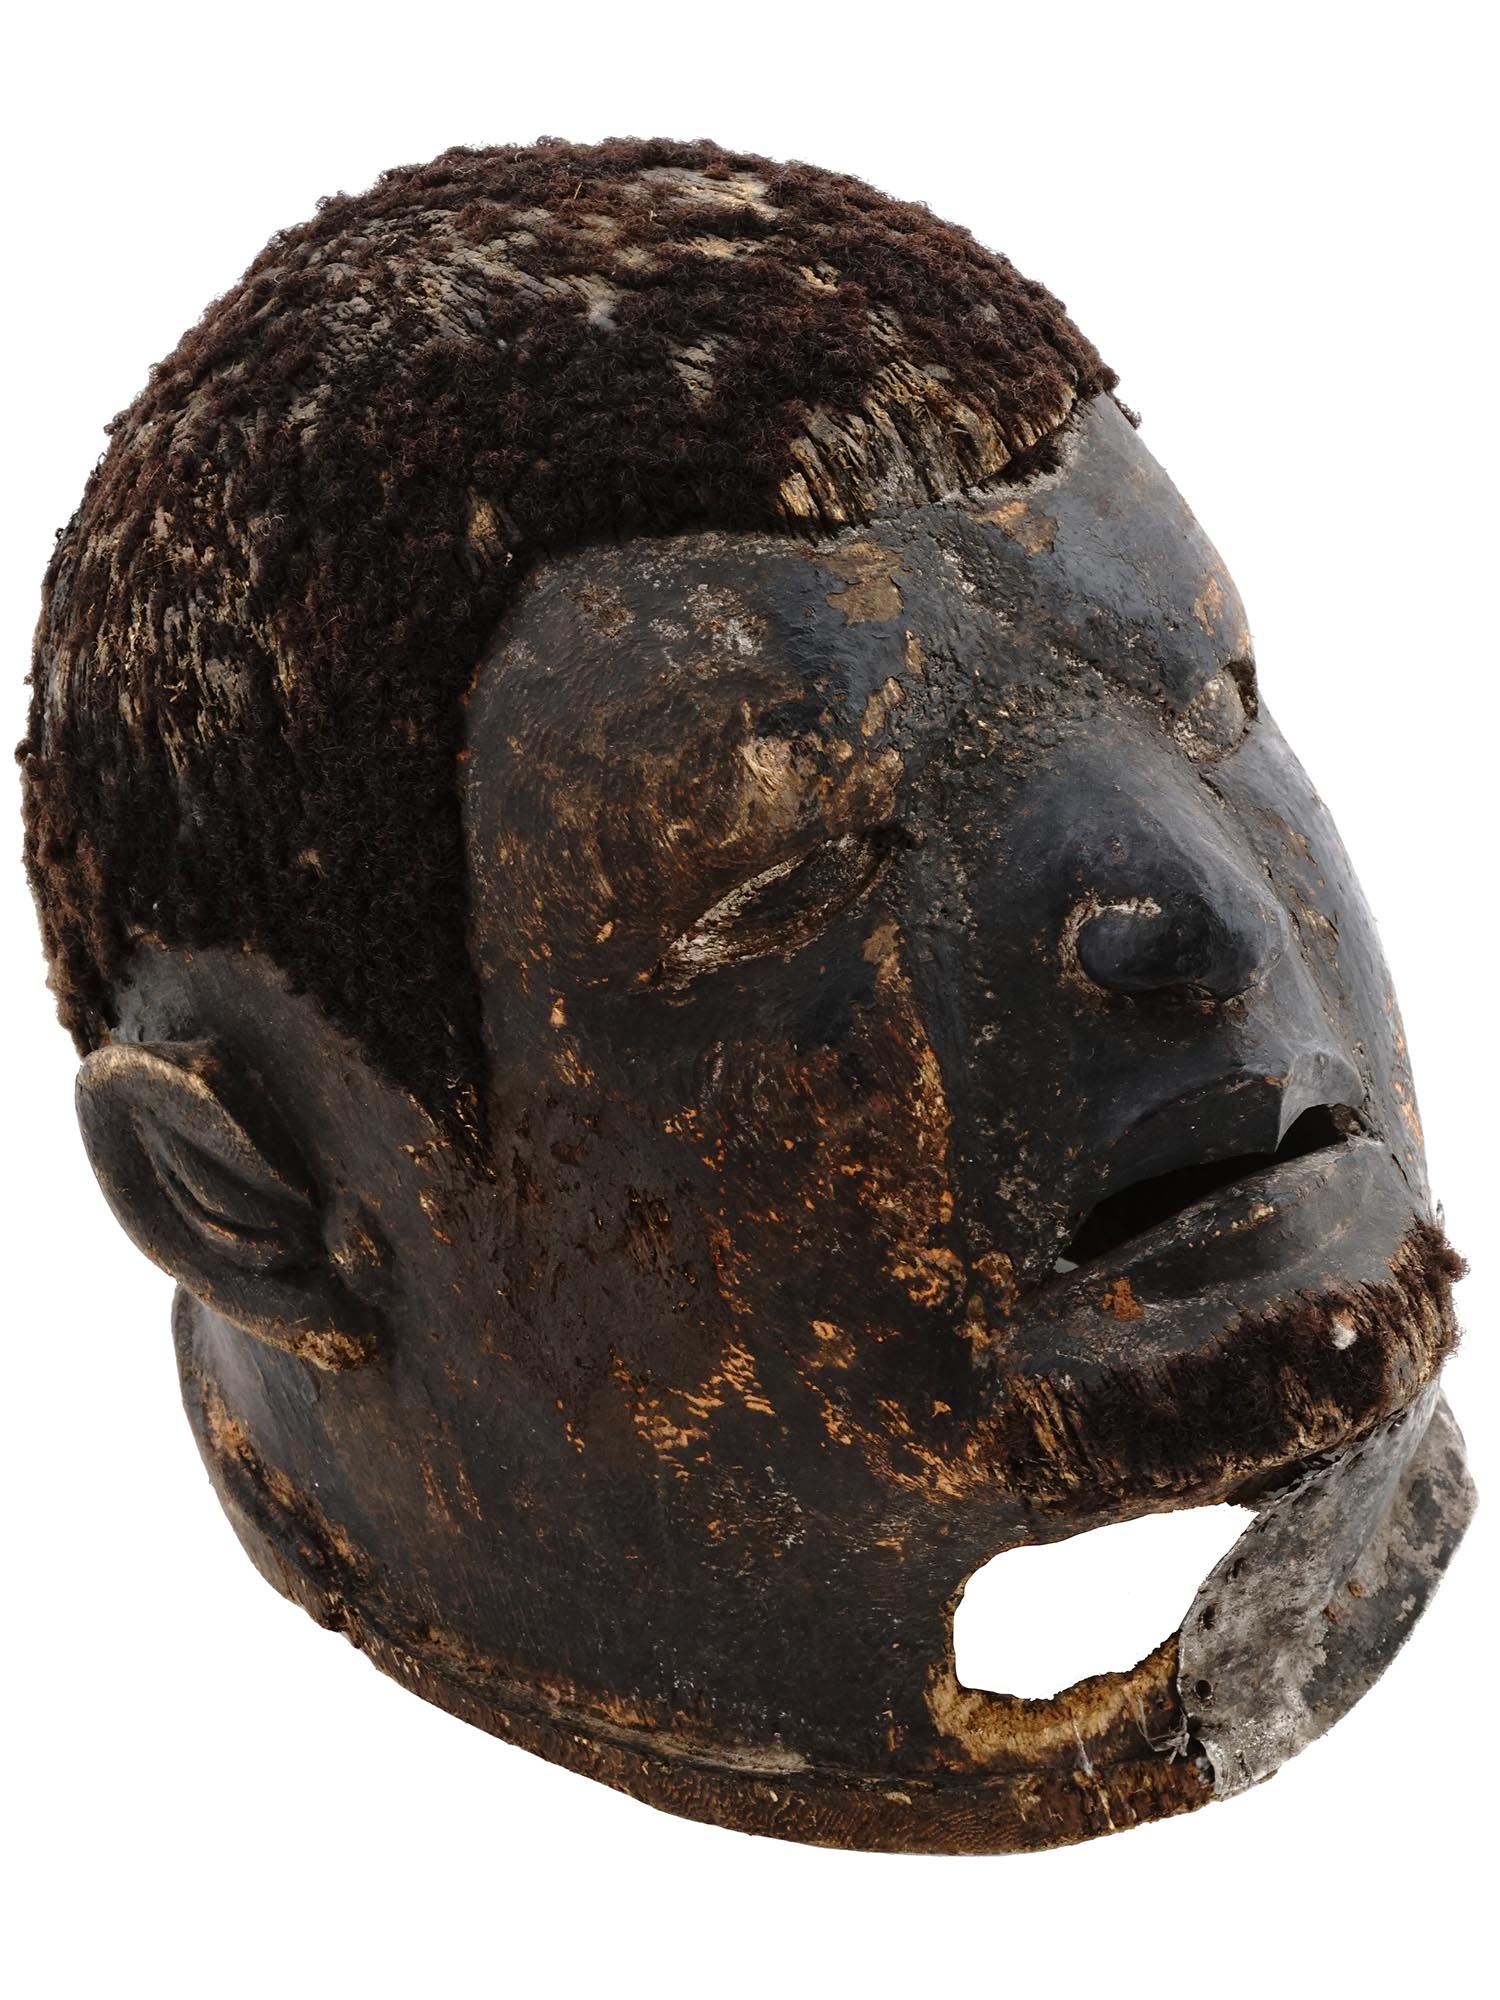 EARLY 20TH C. AFRICAN MAKONDE WOODEN MASK W/ HAIR PIC-1